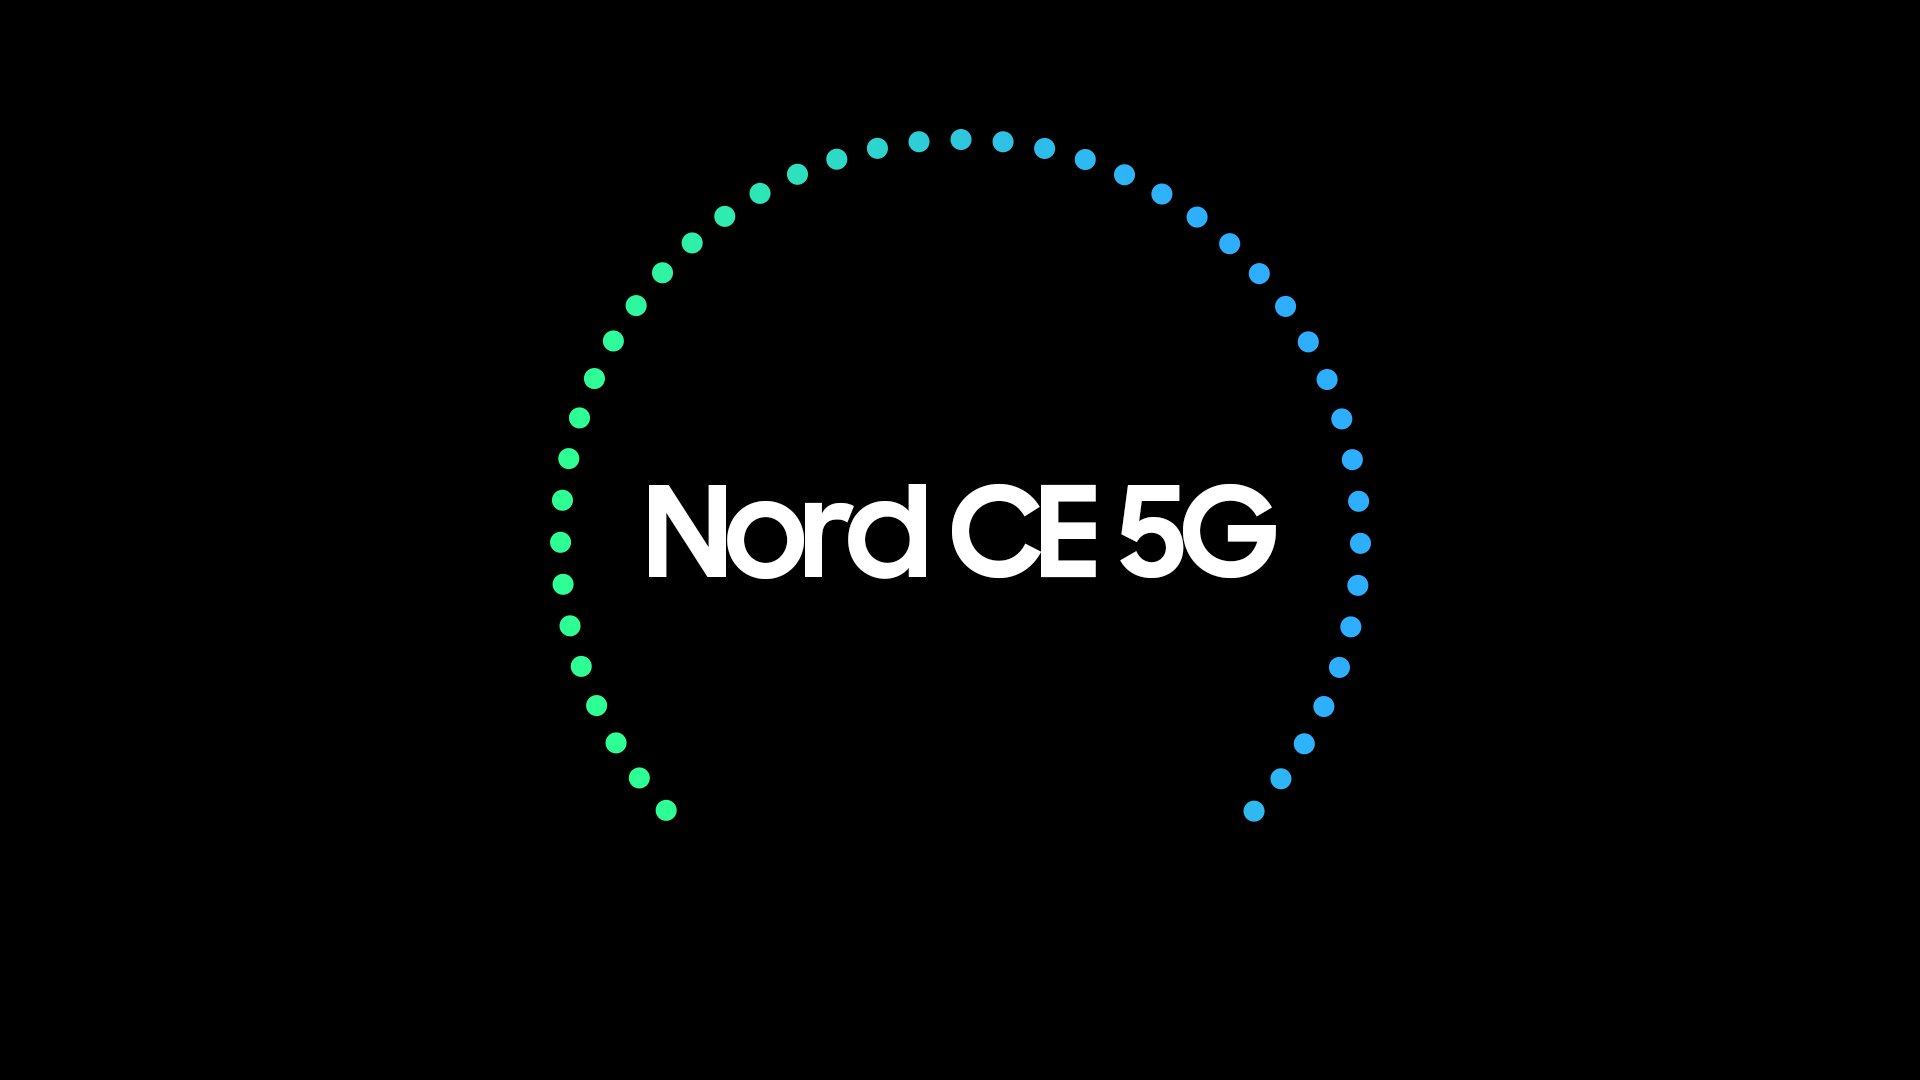 OnePlus Nord N1 could now be called Nord CE 5G per leak